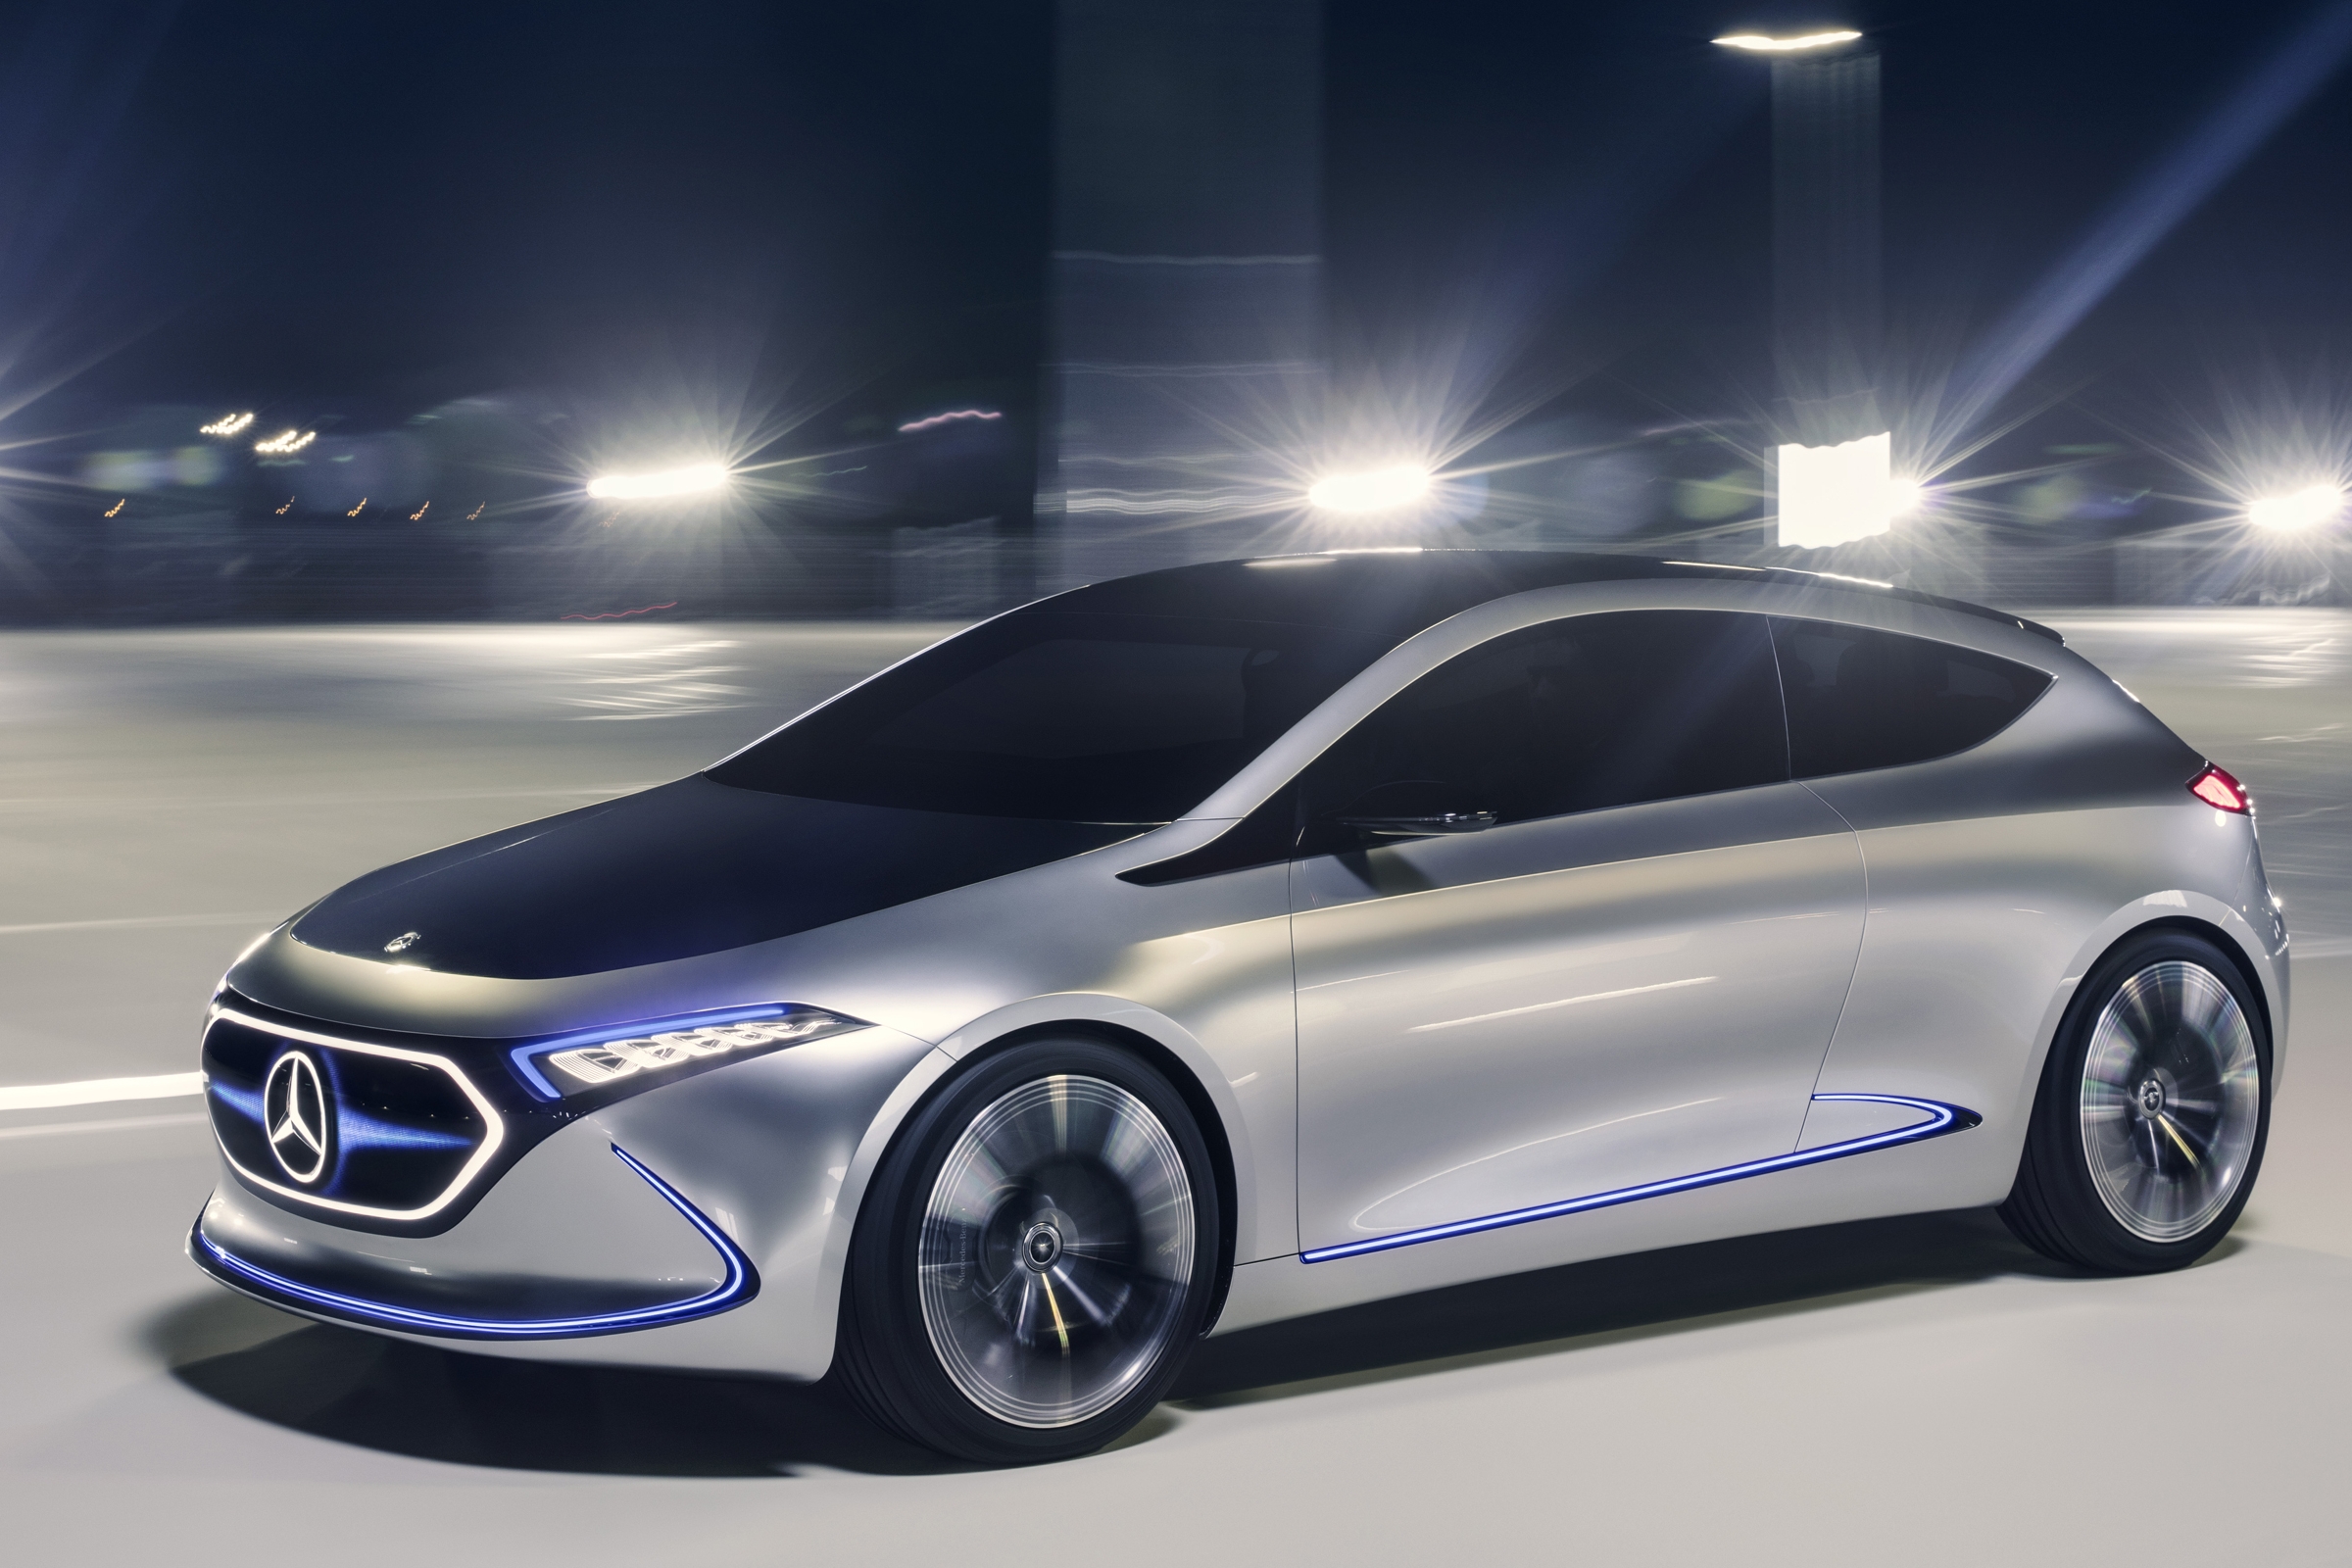 Expect 10 new Mercedes EQ electric cars by 2022 Carbuyer